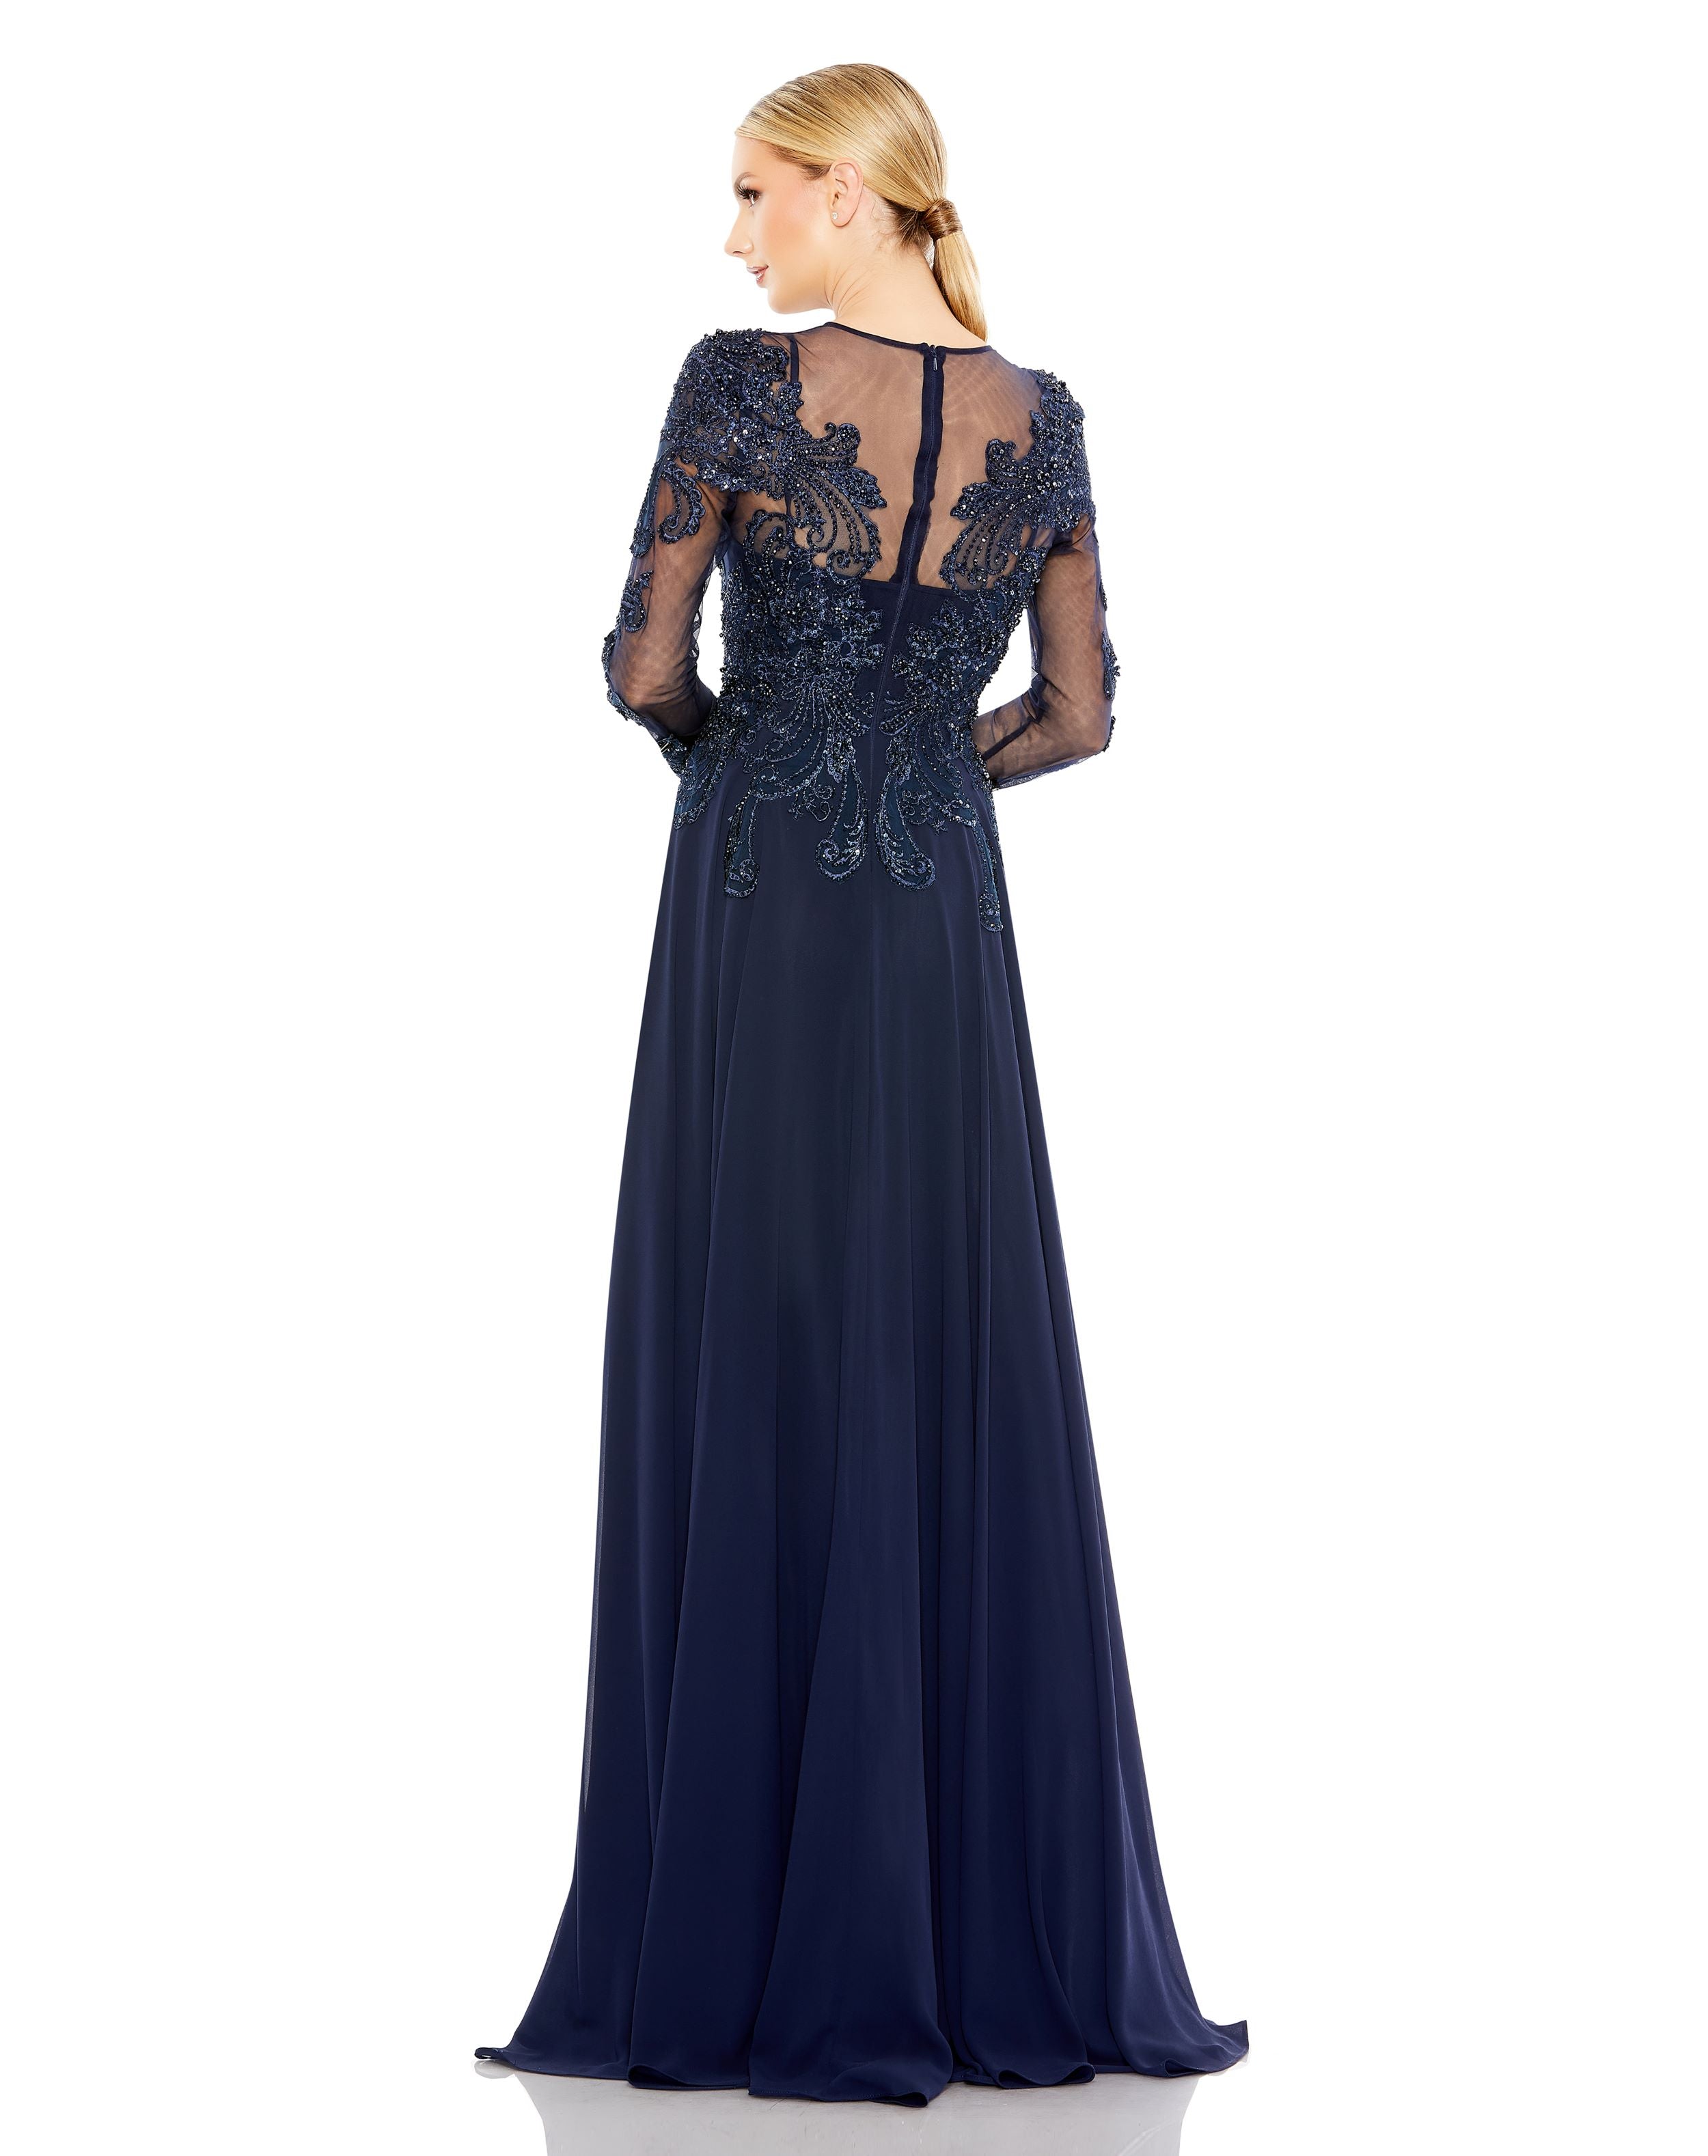 Beaded Applique Illusion High Neck Gown